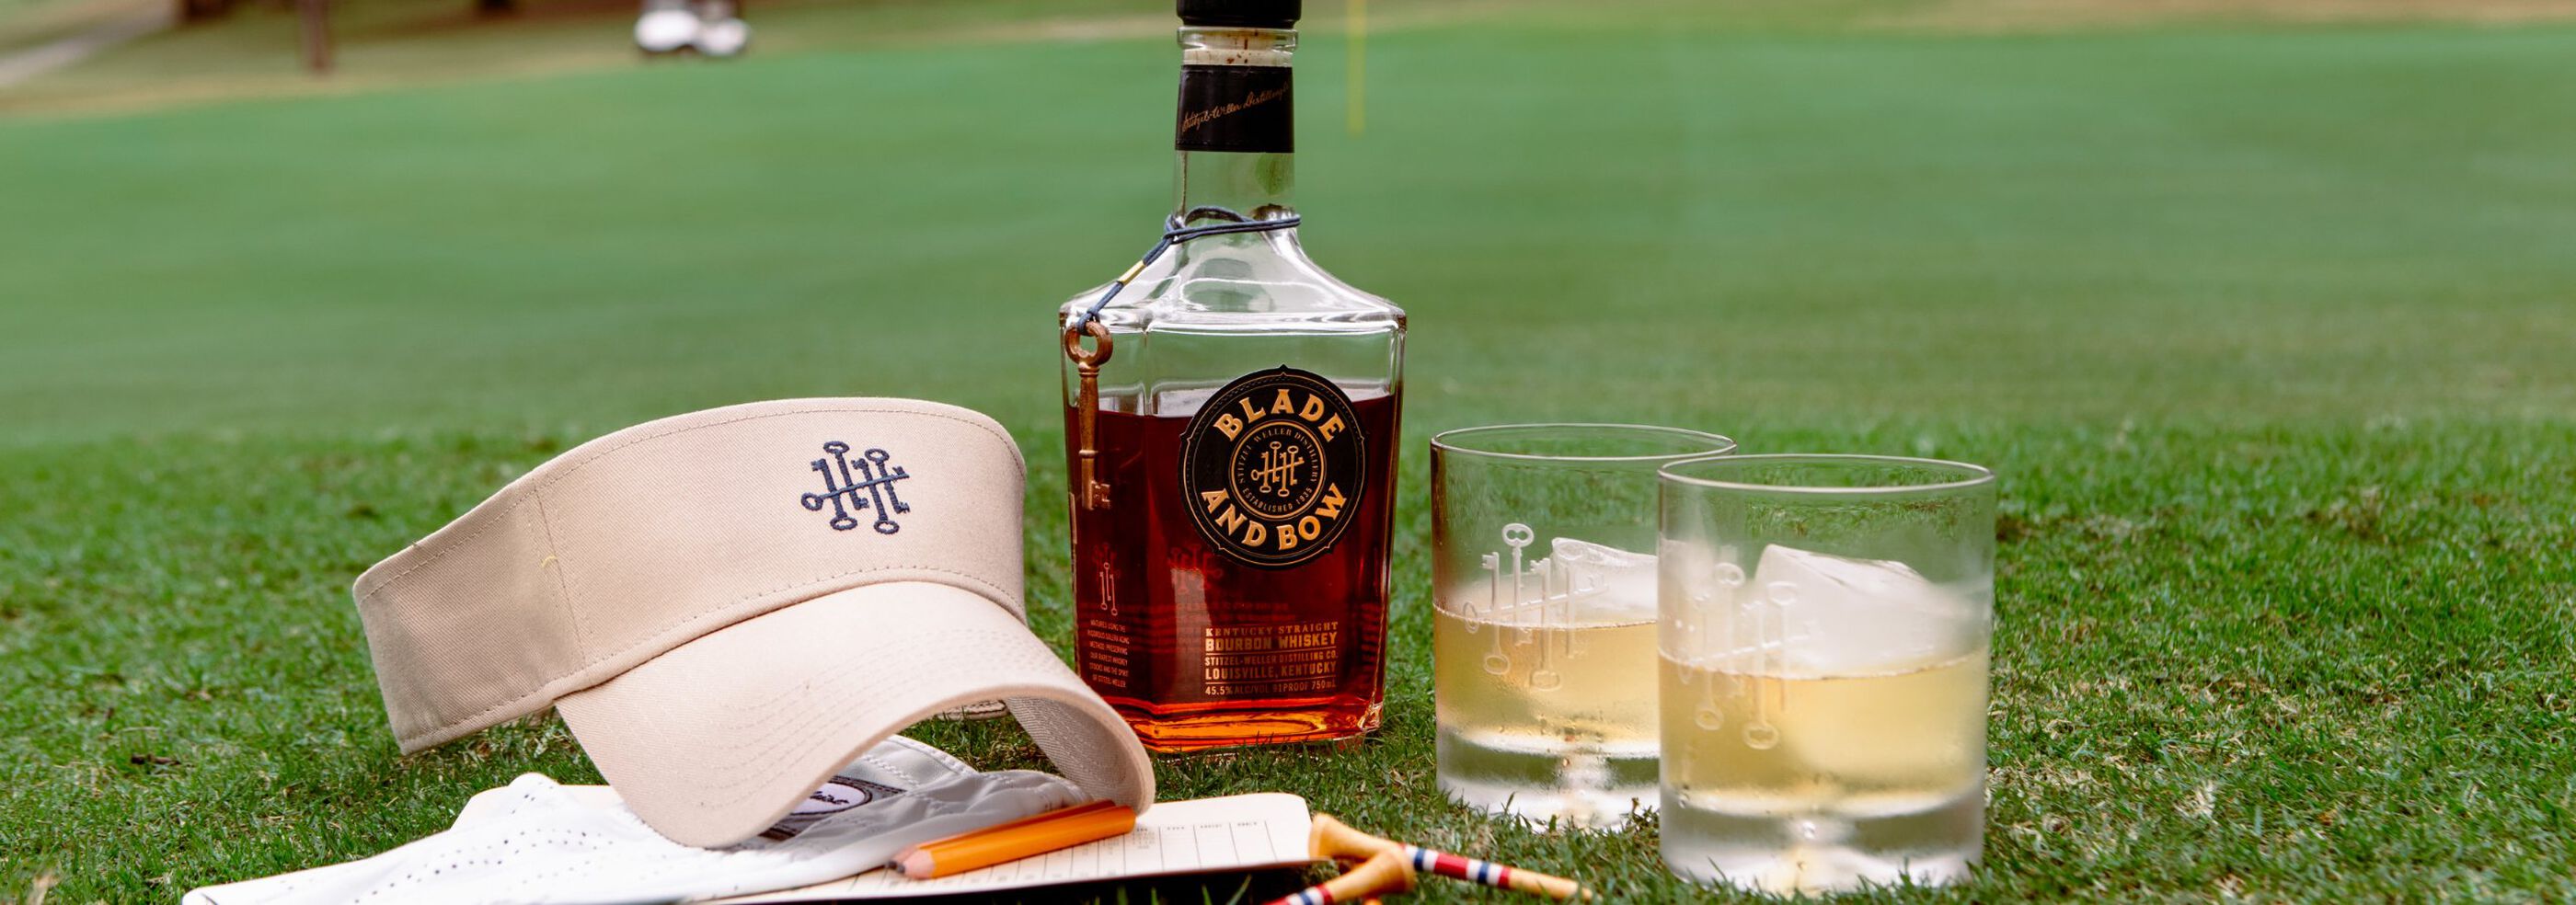 Blade and Bow bottle on golf course turf, beside it- two rocks glasses, golf tees, a visor, gloves, and scorecard